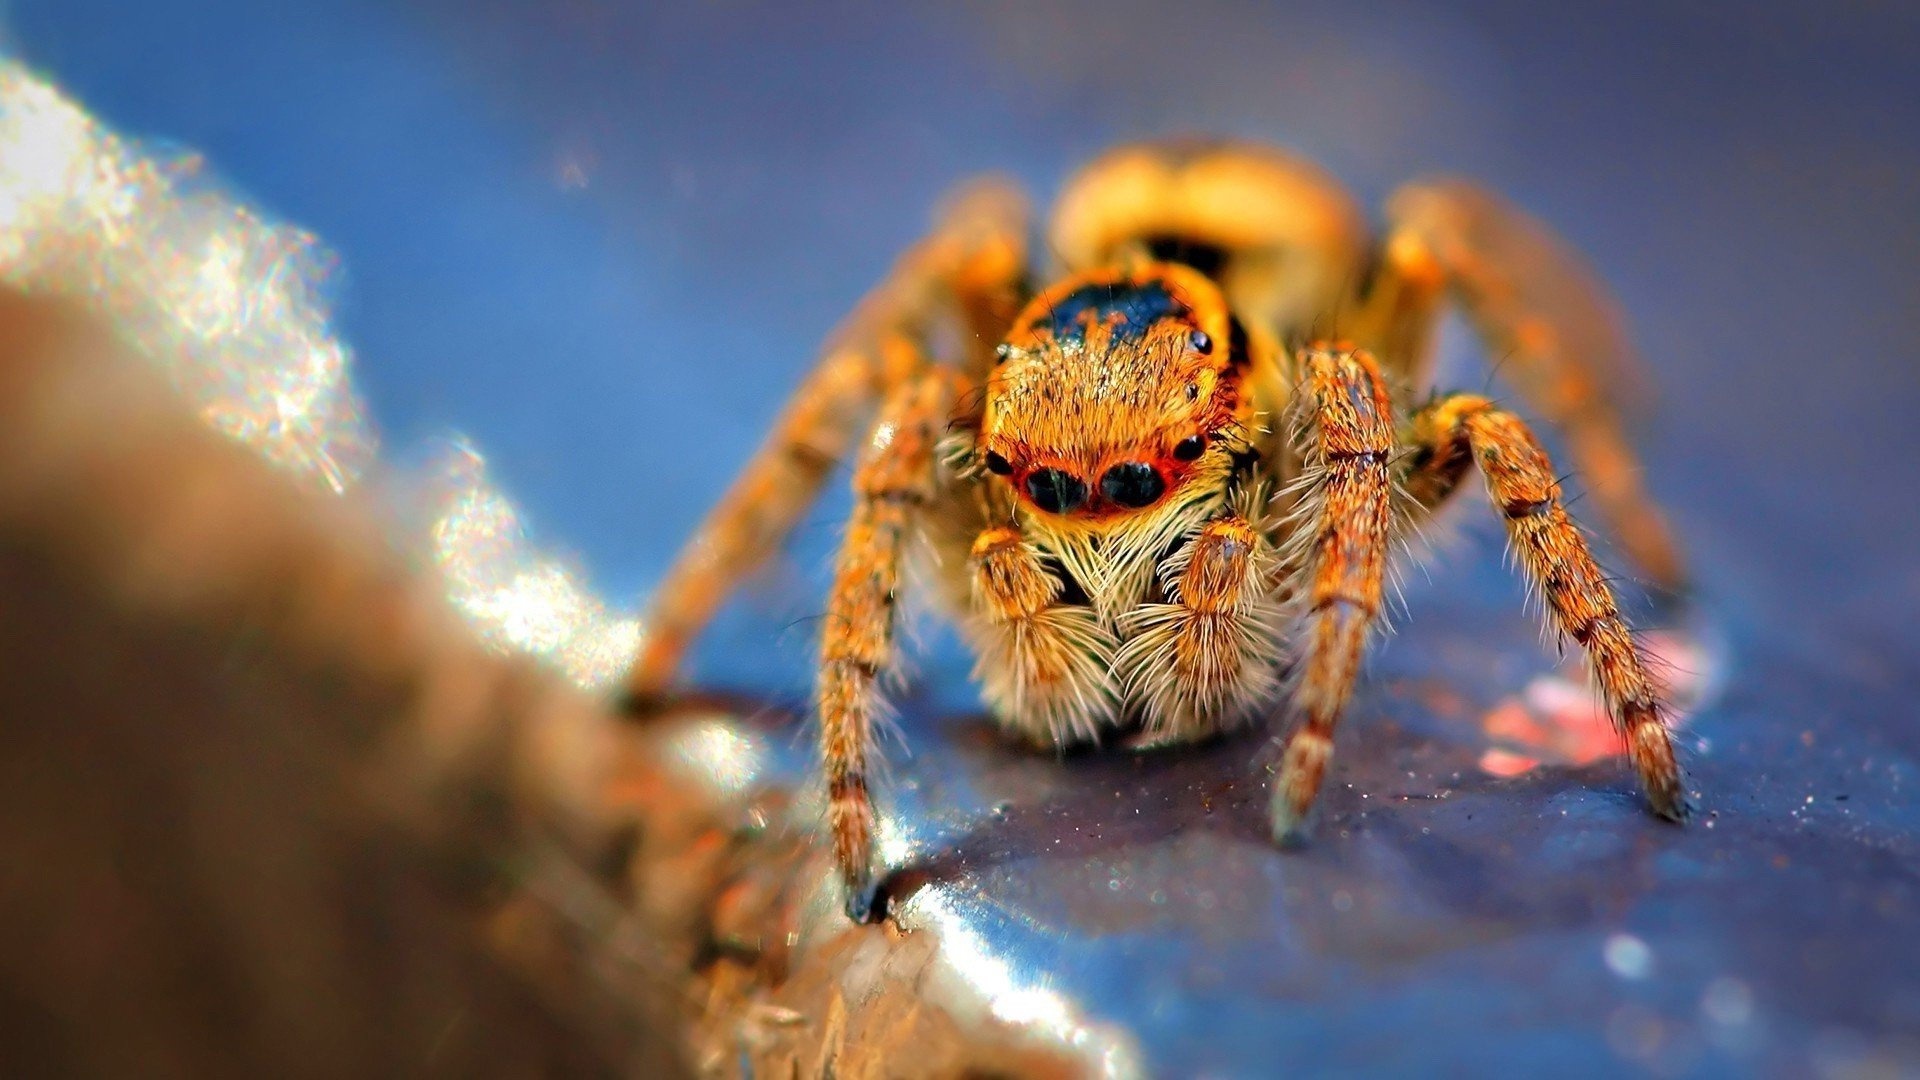 Spider, Jumping spider, Striking wallpapers, Incredible agility, 1920x1080 Full HD Desktop